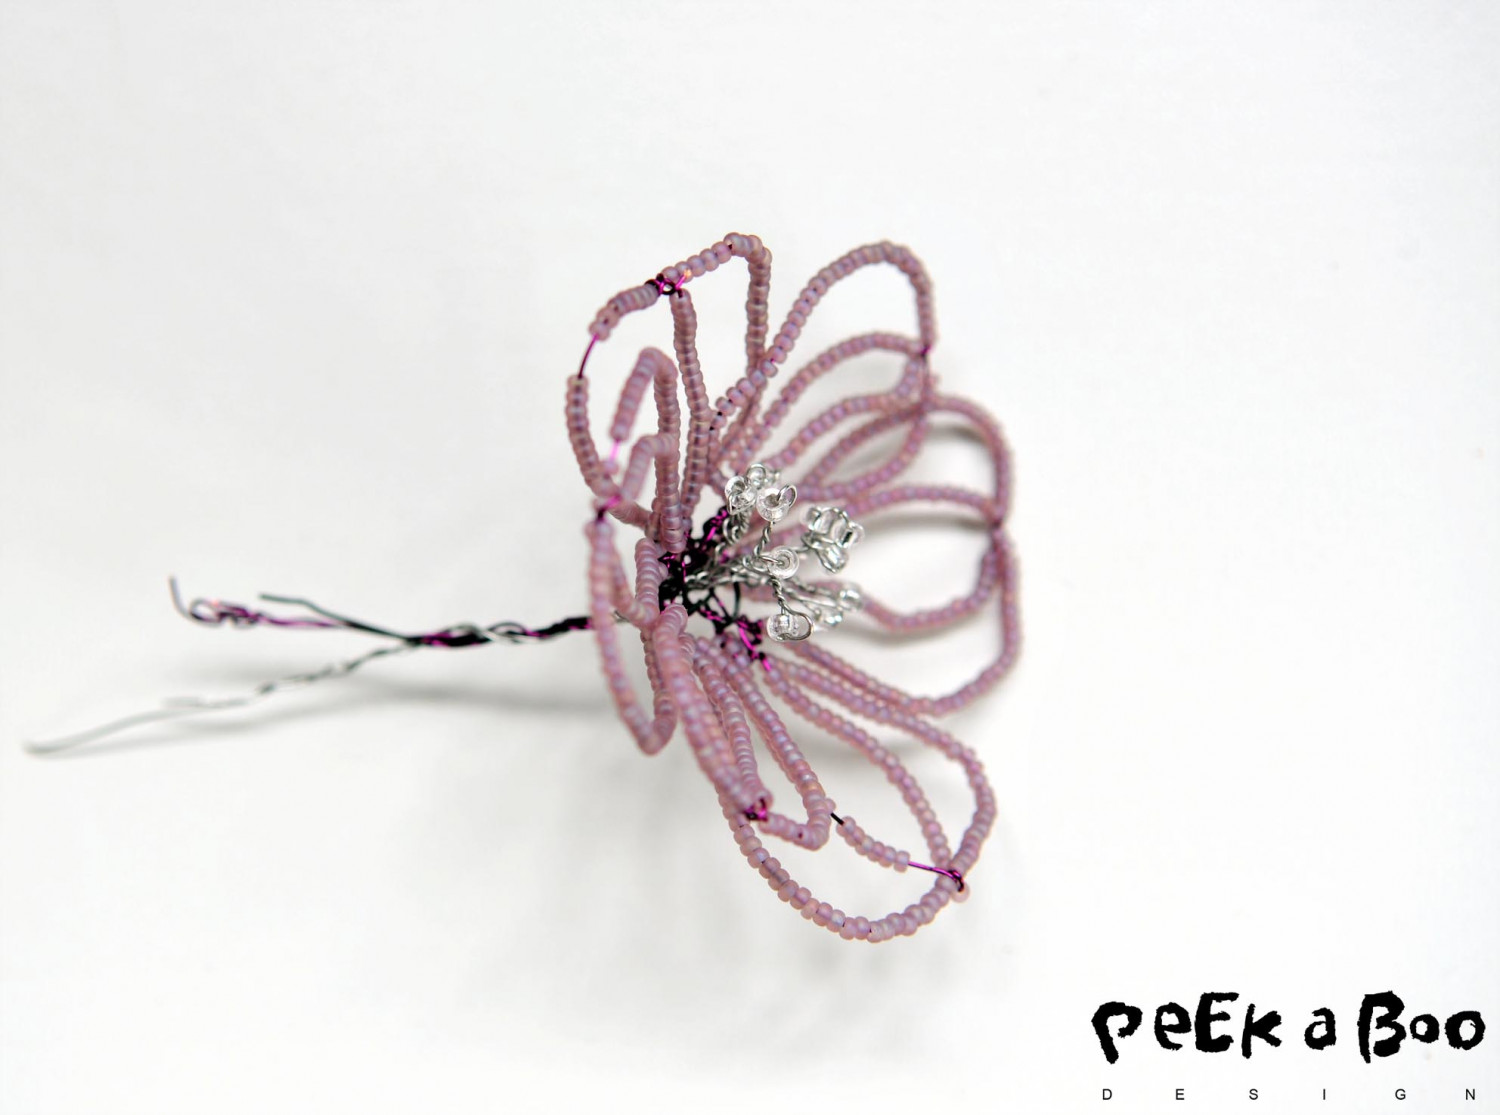 Add the stamen in the middle of the petals and twist the wires.